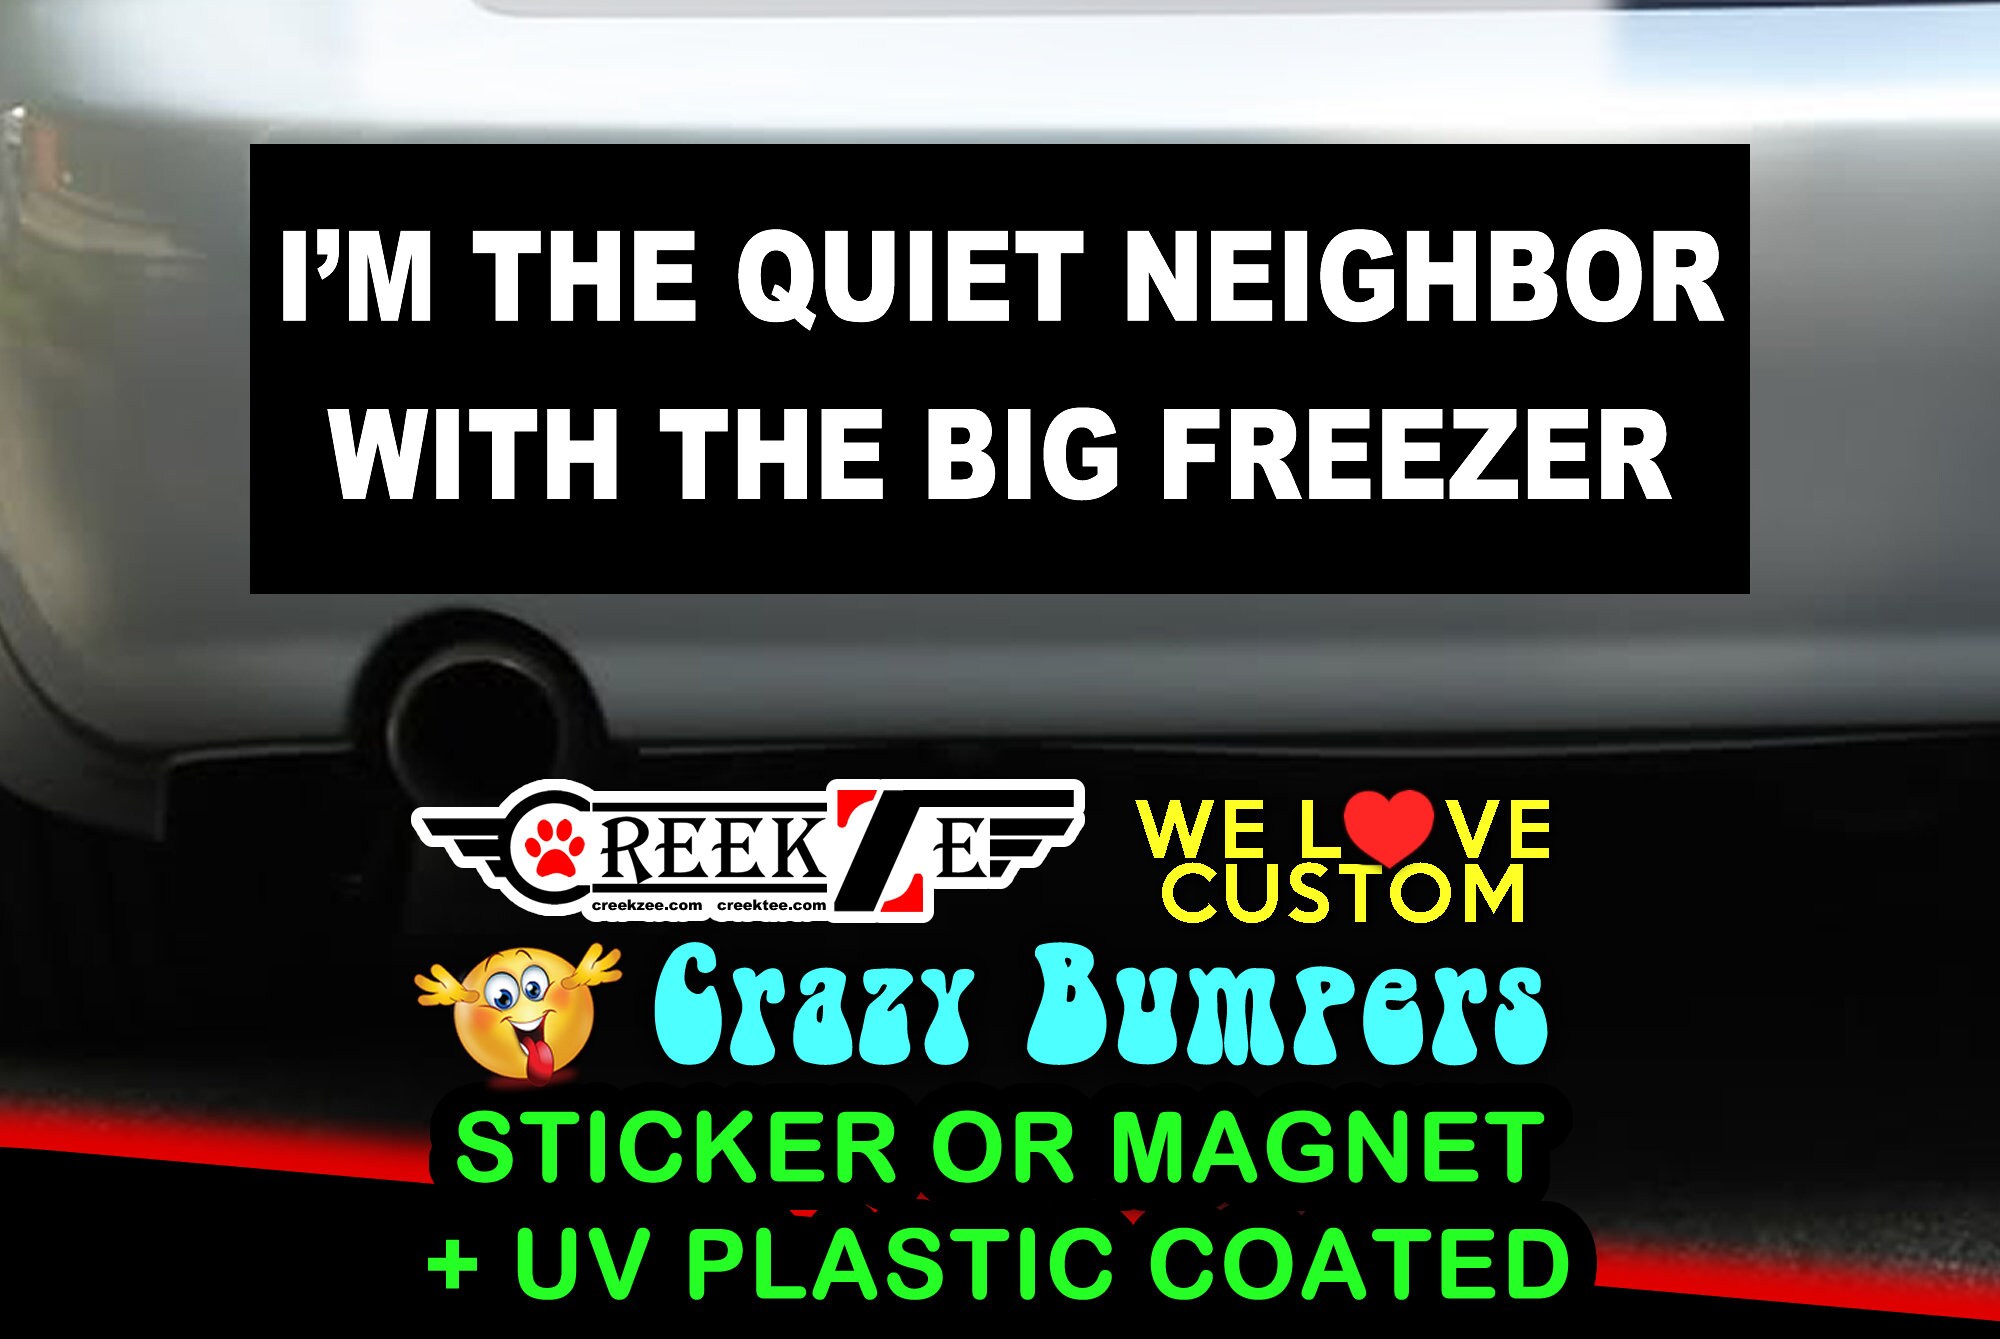 I'm the quiet neighbor with the big freezer Funny Bumper Sticker or Magnet sizes 4